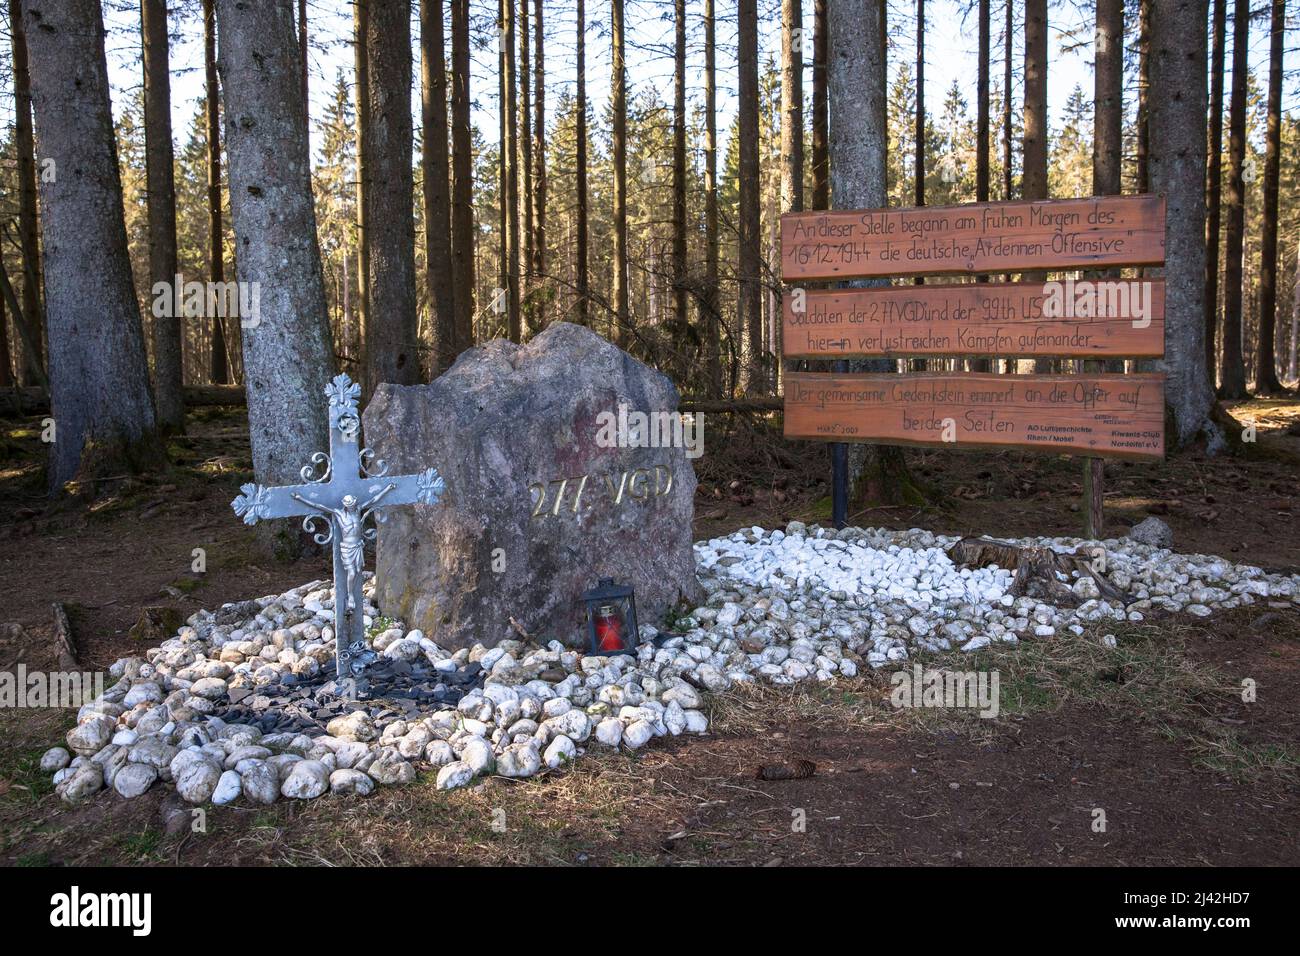 memorial stone and plaque of the Battle of the Bulge in a forest near Hellenthal-Hollerath, Eifel region, North Rhine-Westphalia, Germany. At this poi Stock Photo